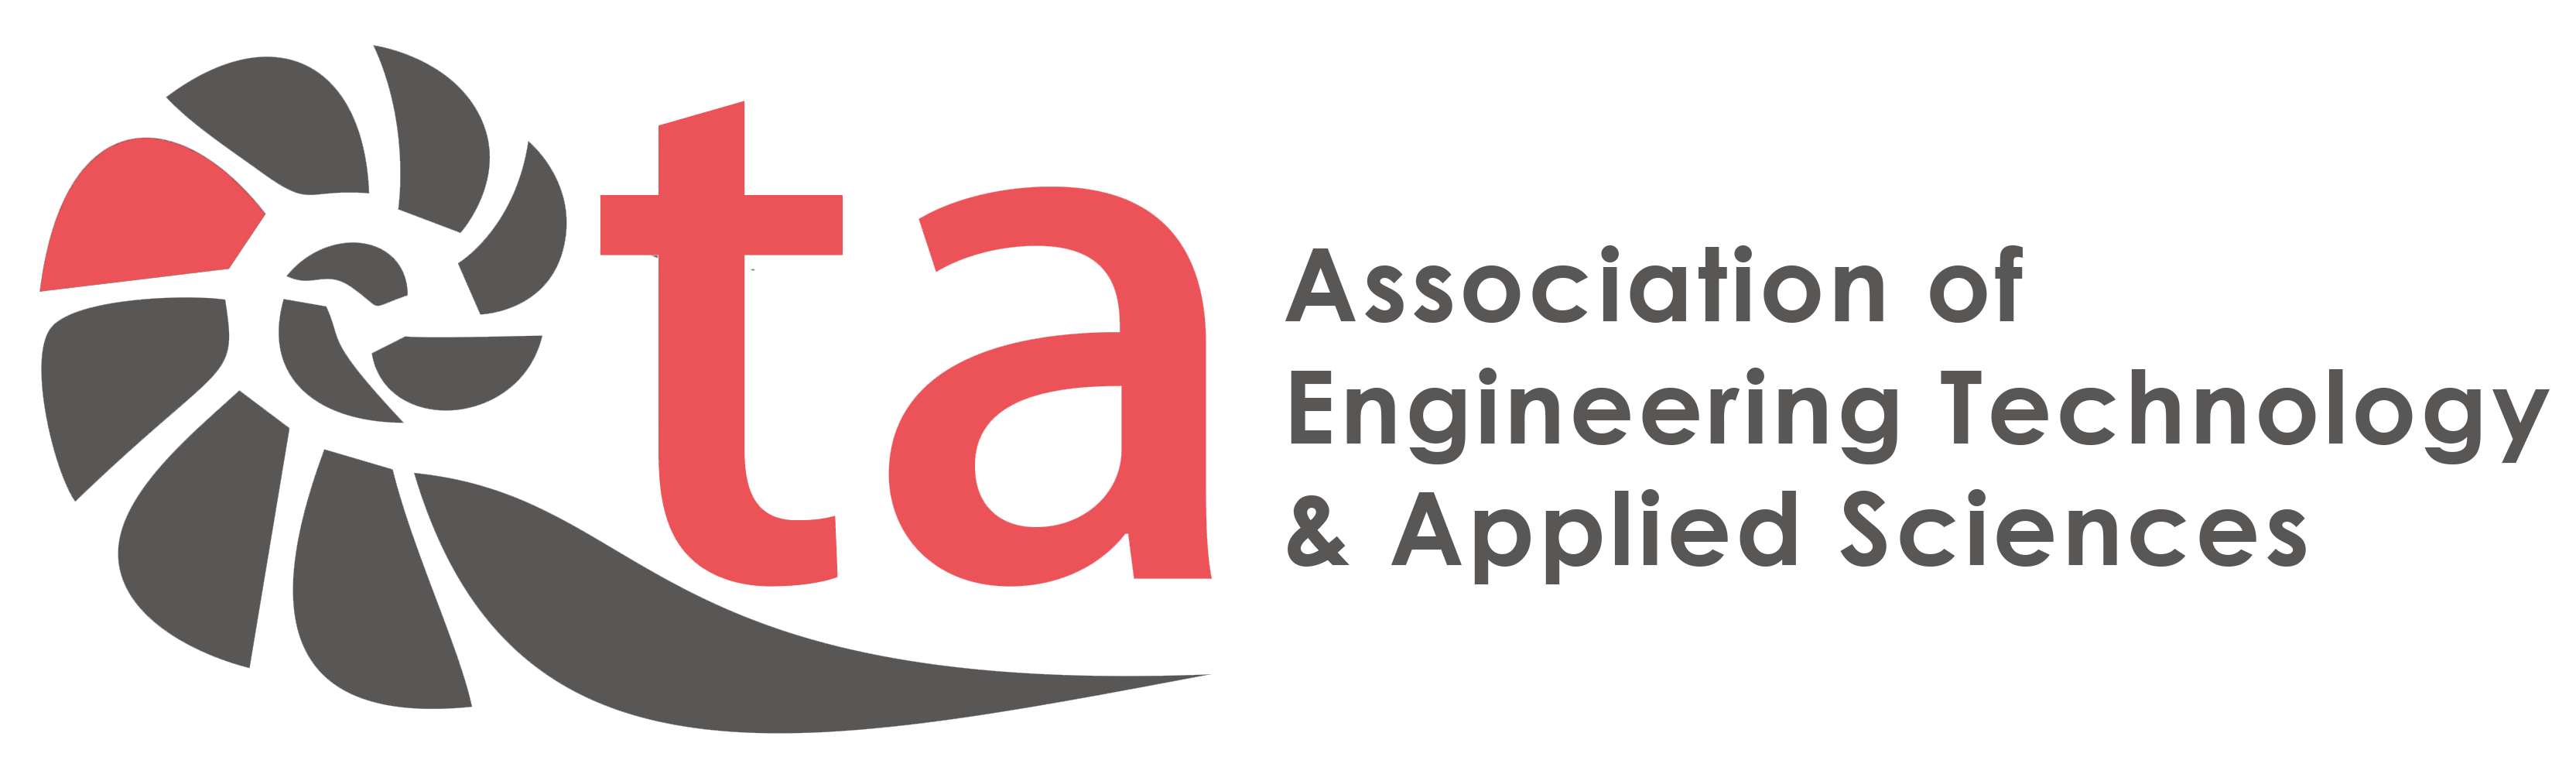 AETA International Conference on Current Issues in Engineering Management, Computer Sciences, IT, Applied Sciences & Reproduction ECIT